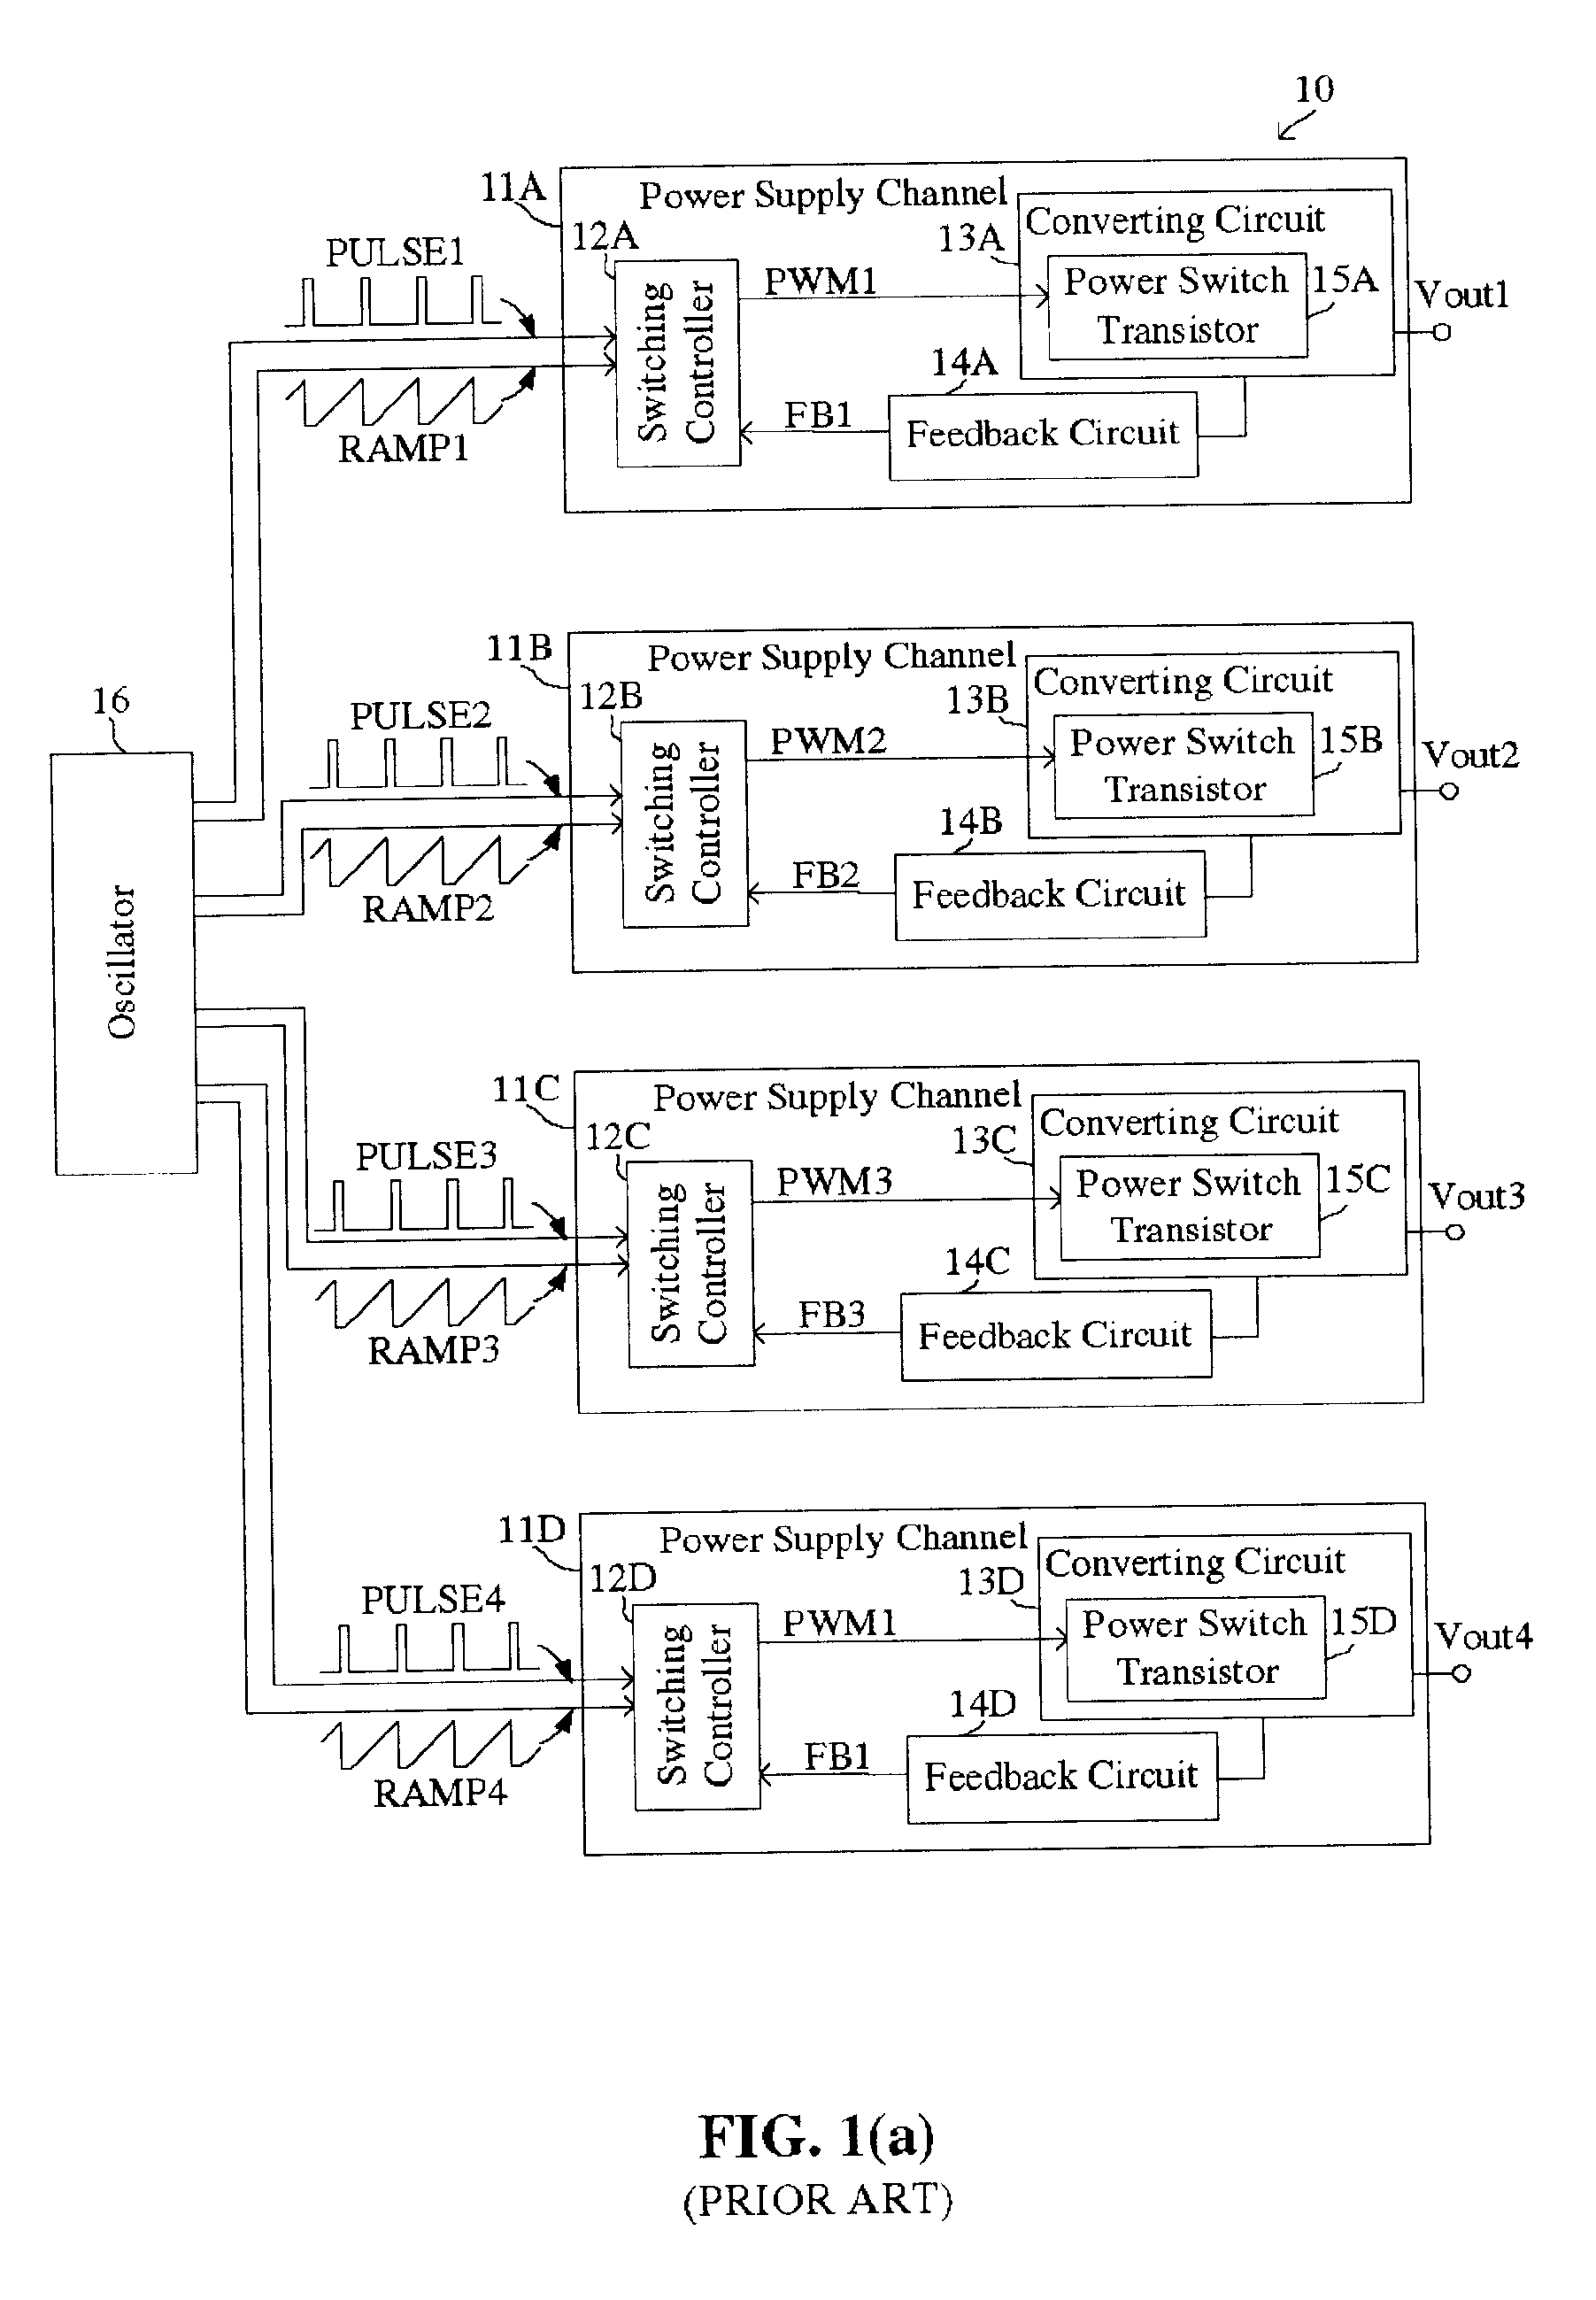 Switching DC-to-DC converter with multiple output voltages